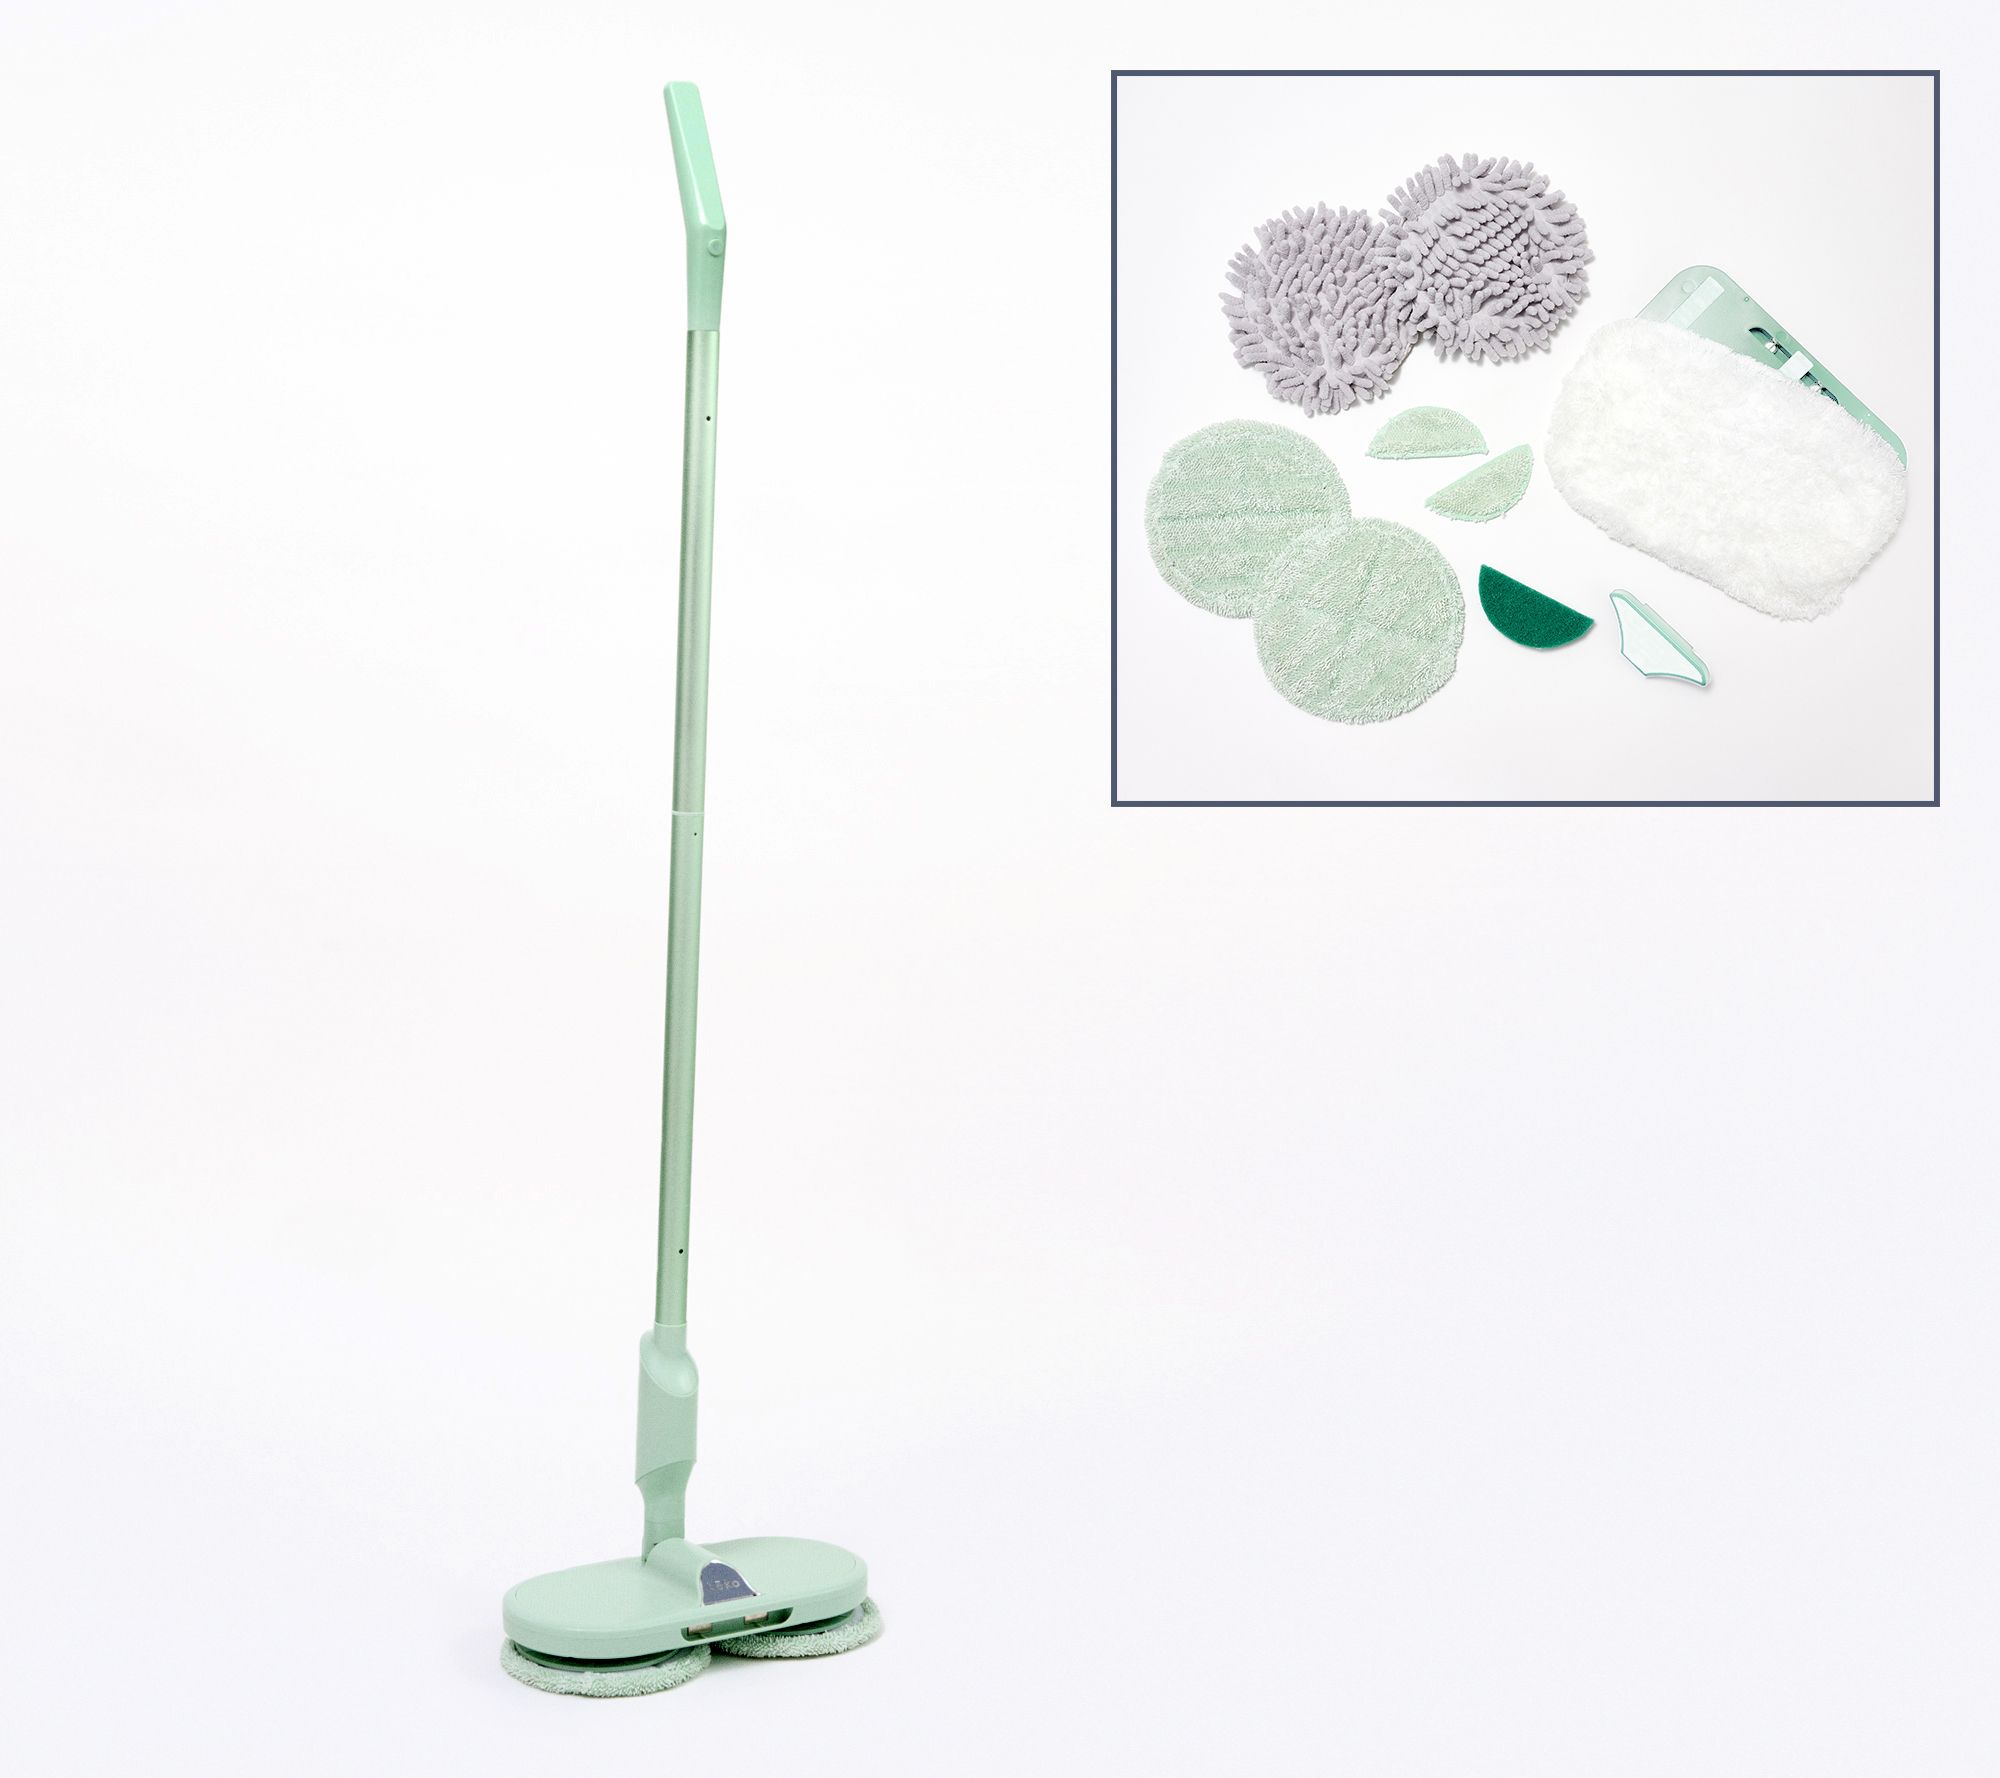  Mopping Accessories - Swiffer / Mopping Accessories / Household  Mops, Buckets & : Health & Household